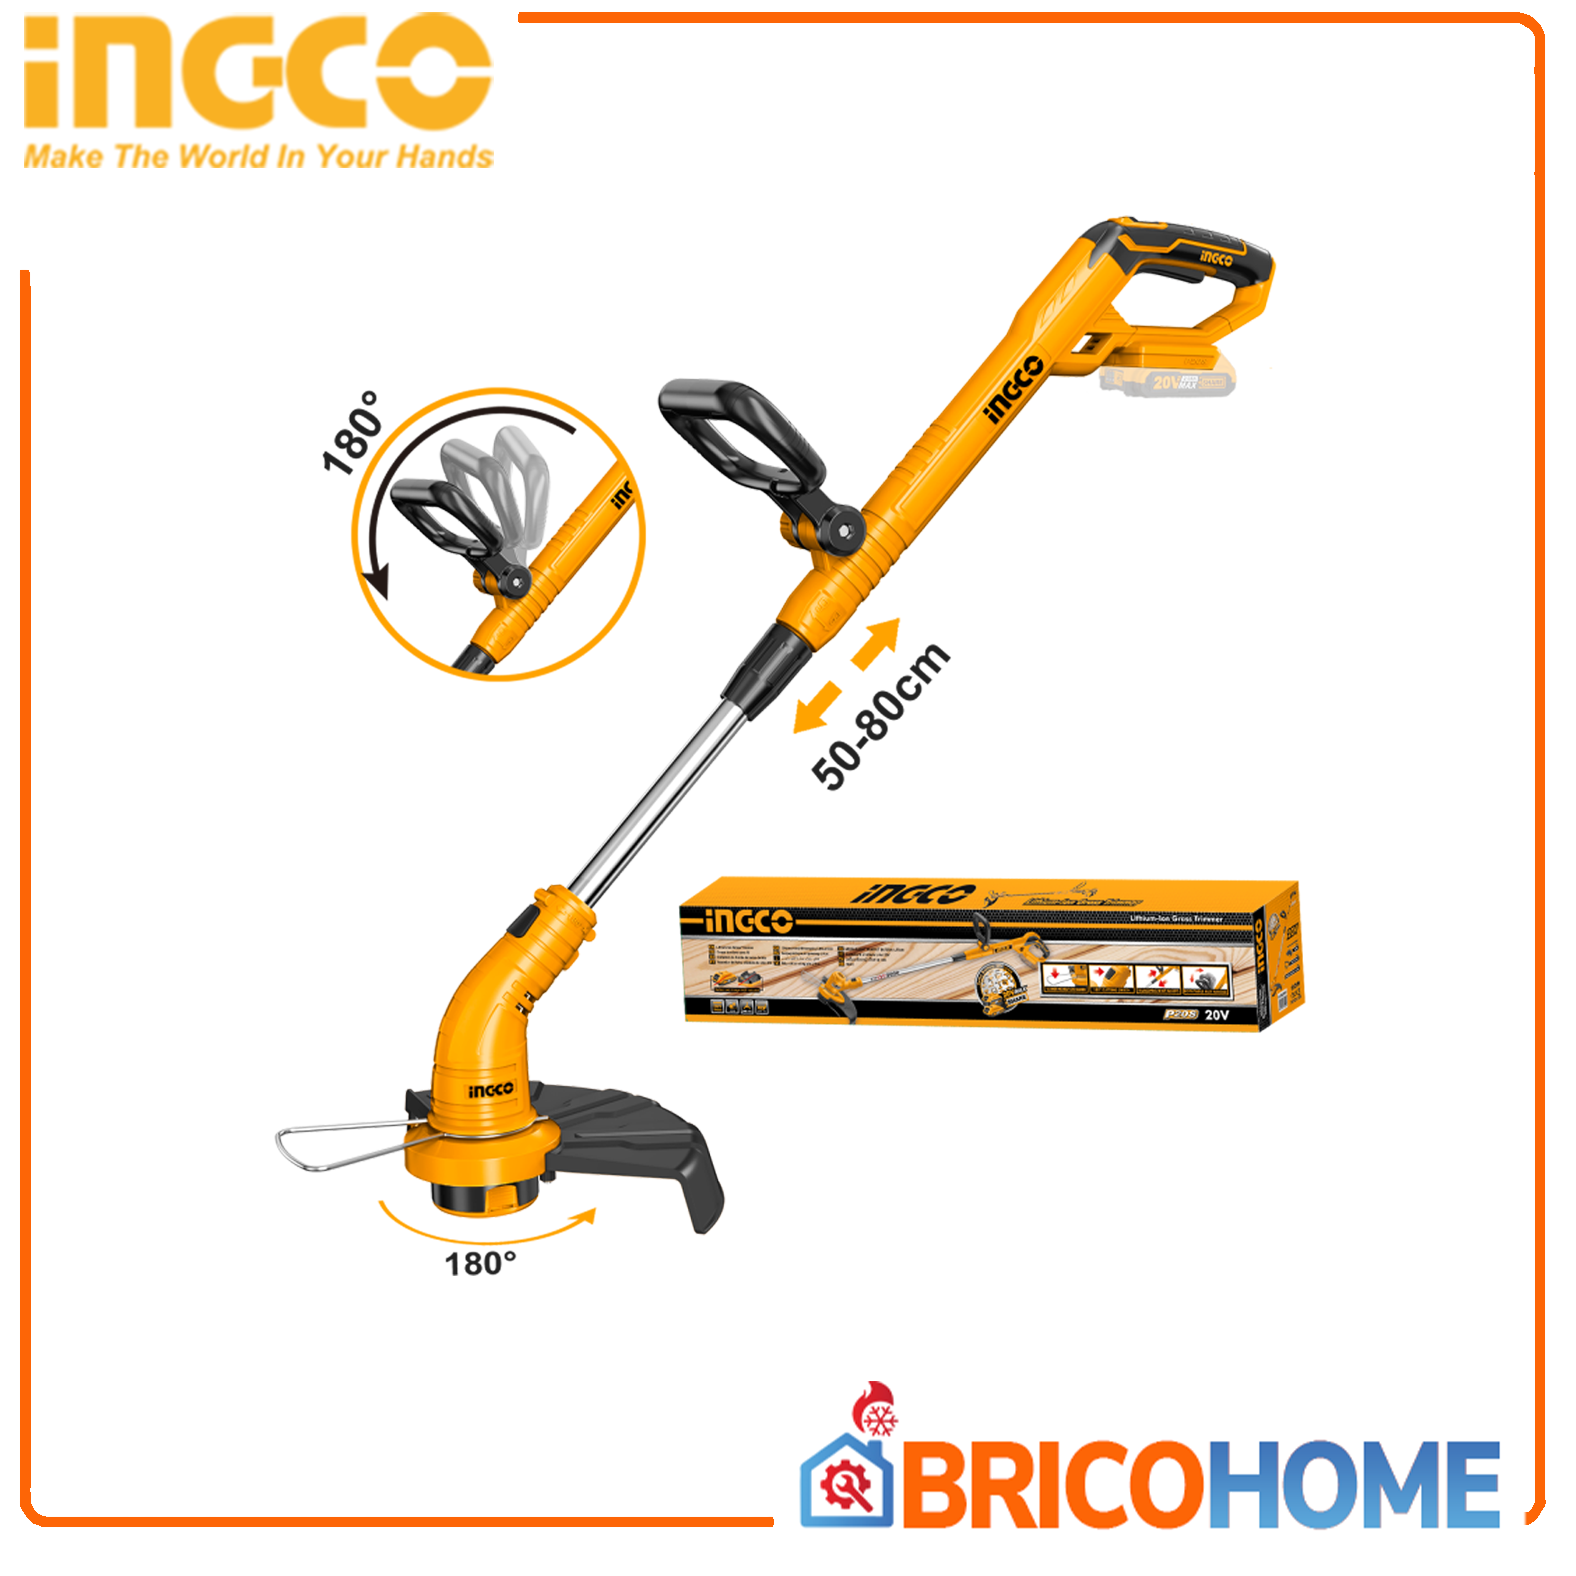 INGCO 20V telescopic trimmer 300MM (battery and charger not included) 